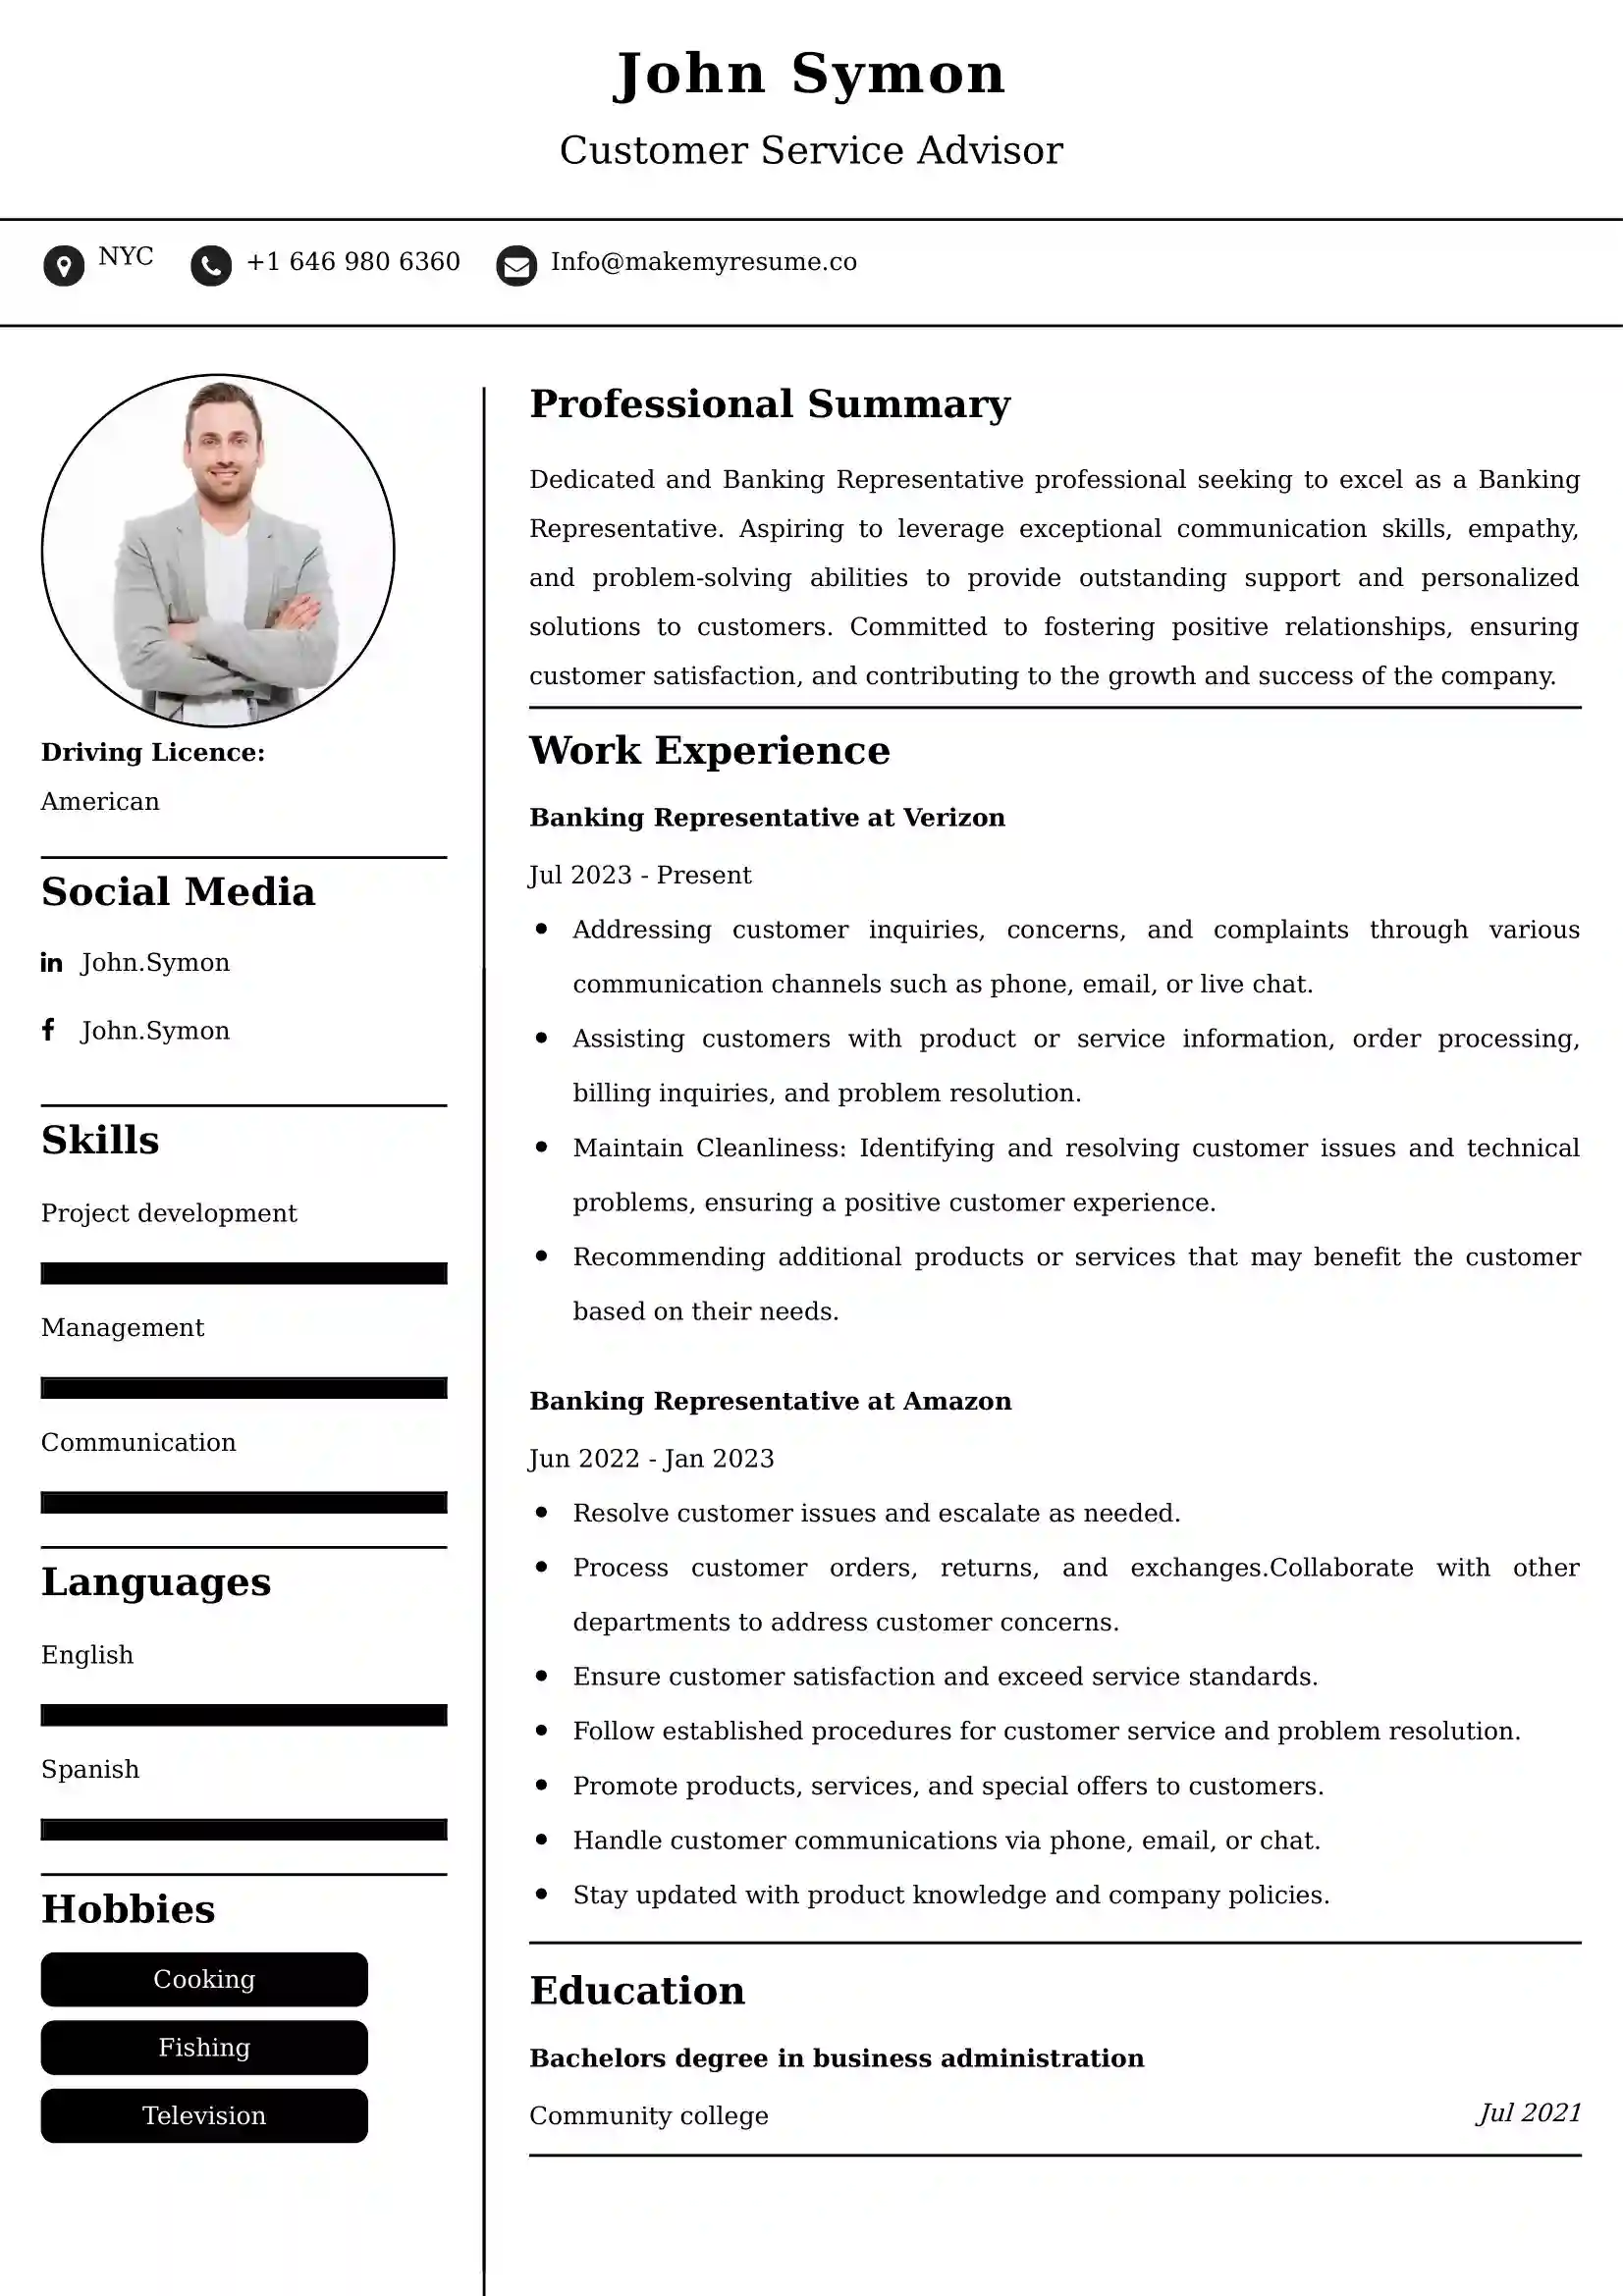 Banking Representative Resume Examples for UK Jobs - Tips and Guide